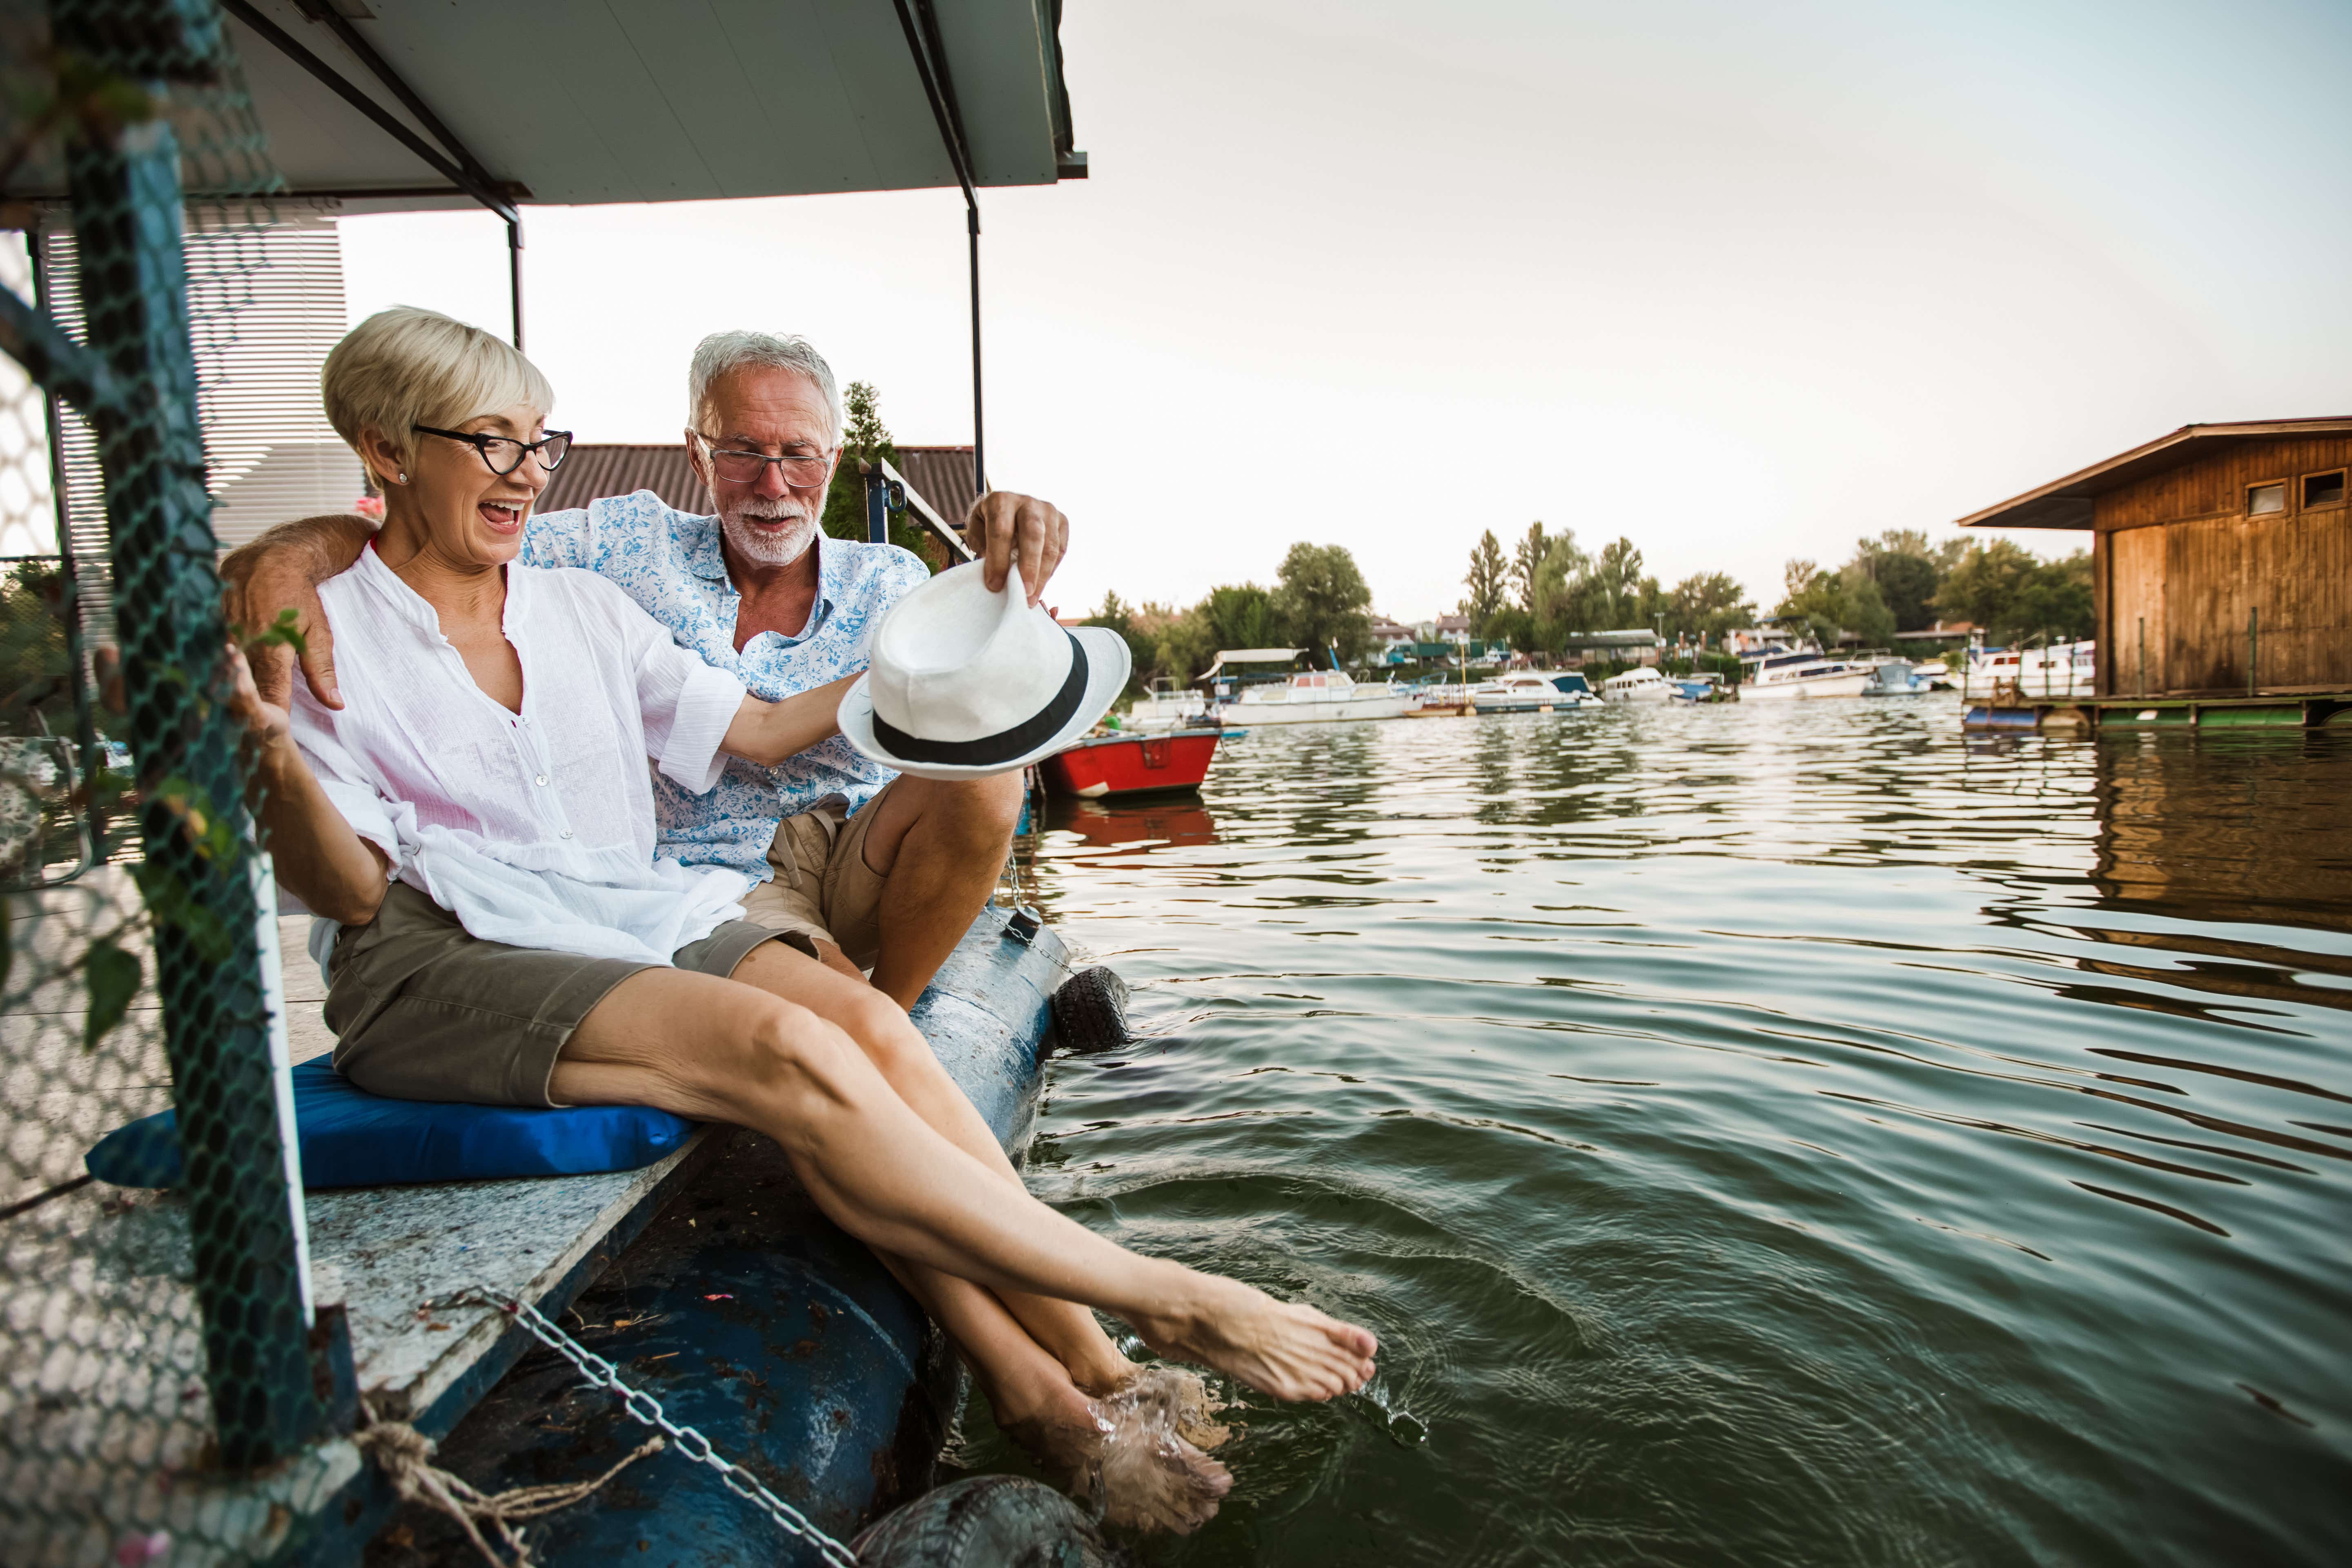 An older male/female couple sits on the side of a boat dipping their feet in the water and smiling. The boating lake continues into the background with a wooden hut and trees along the horizon.